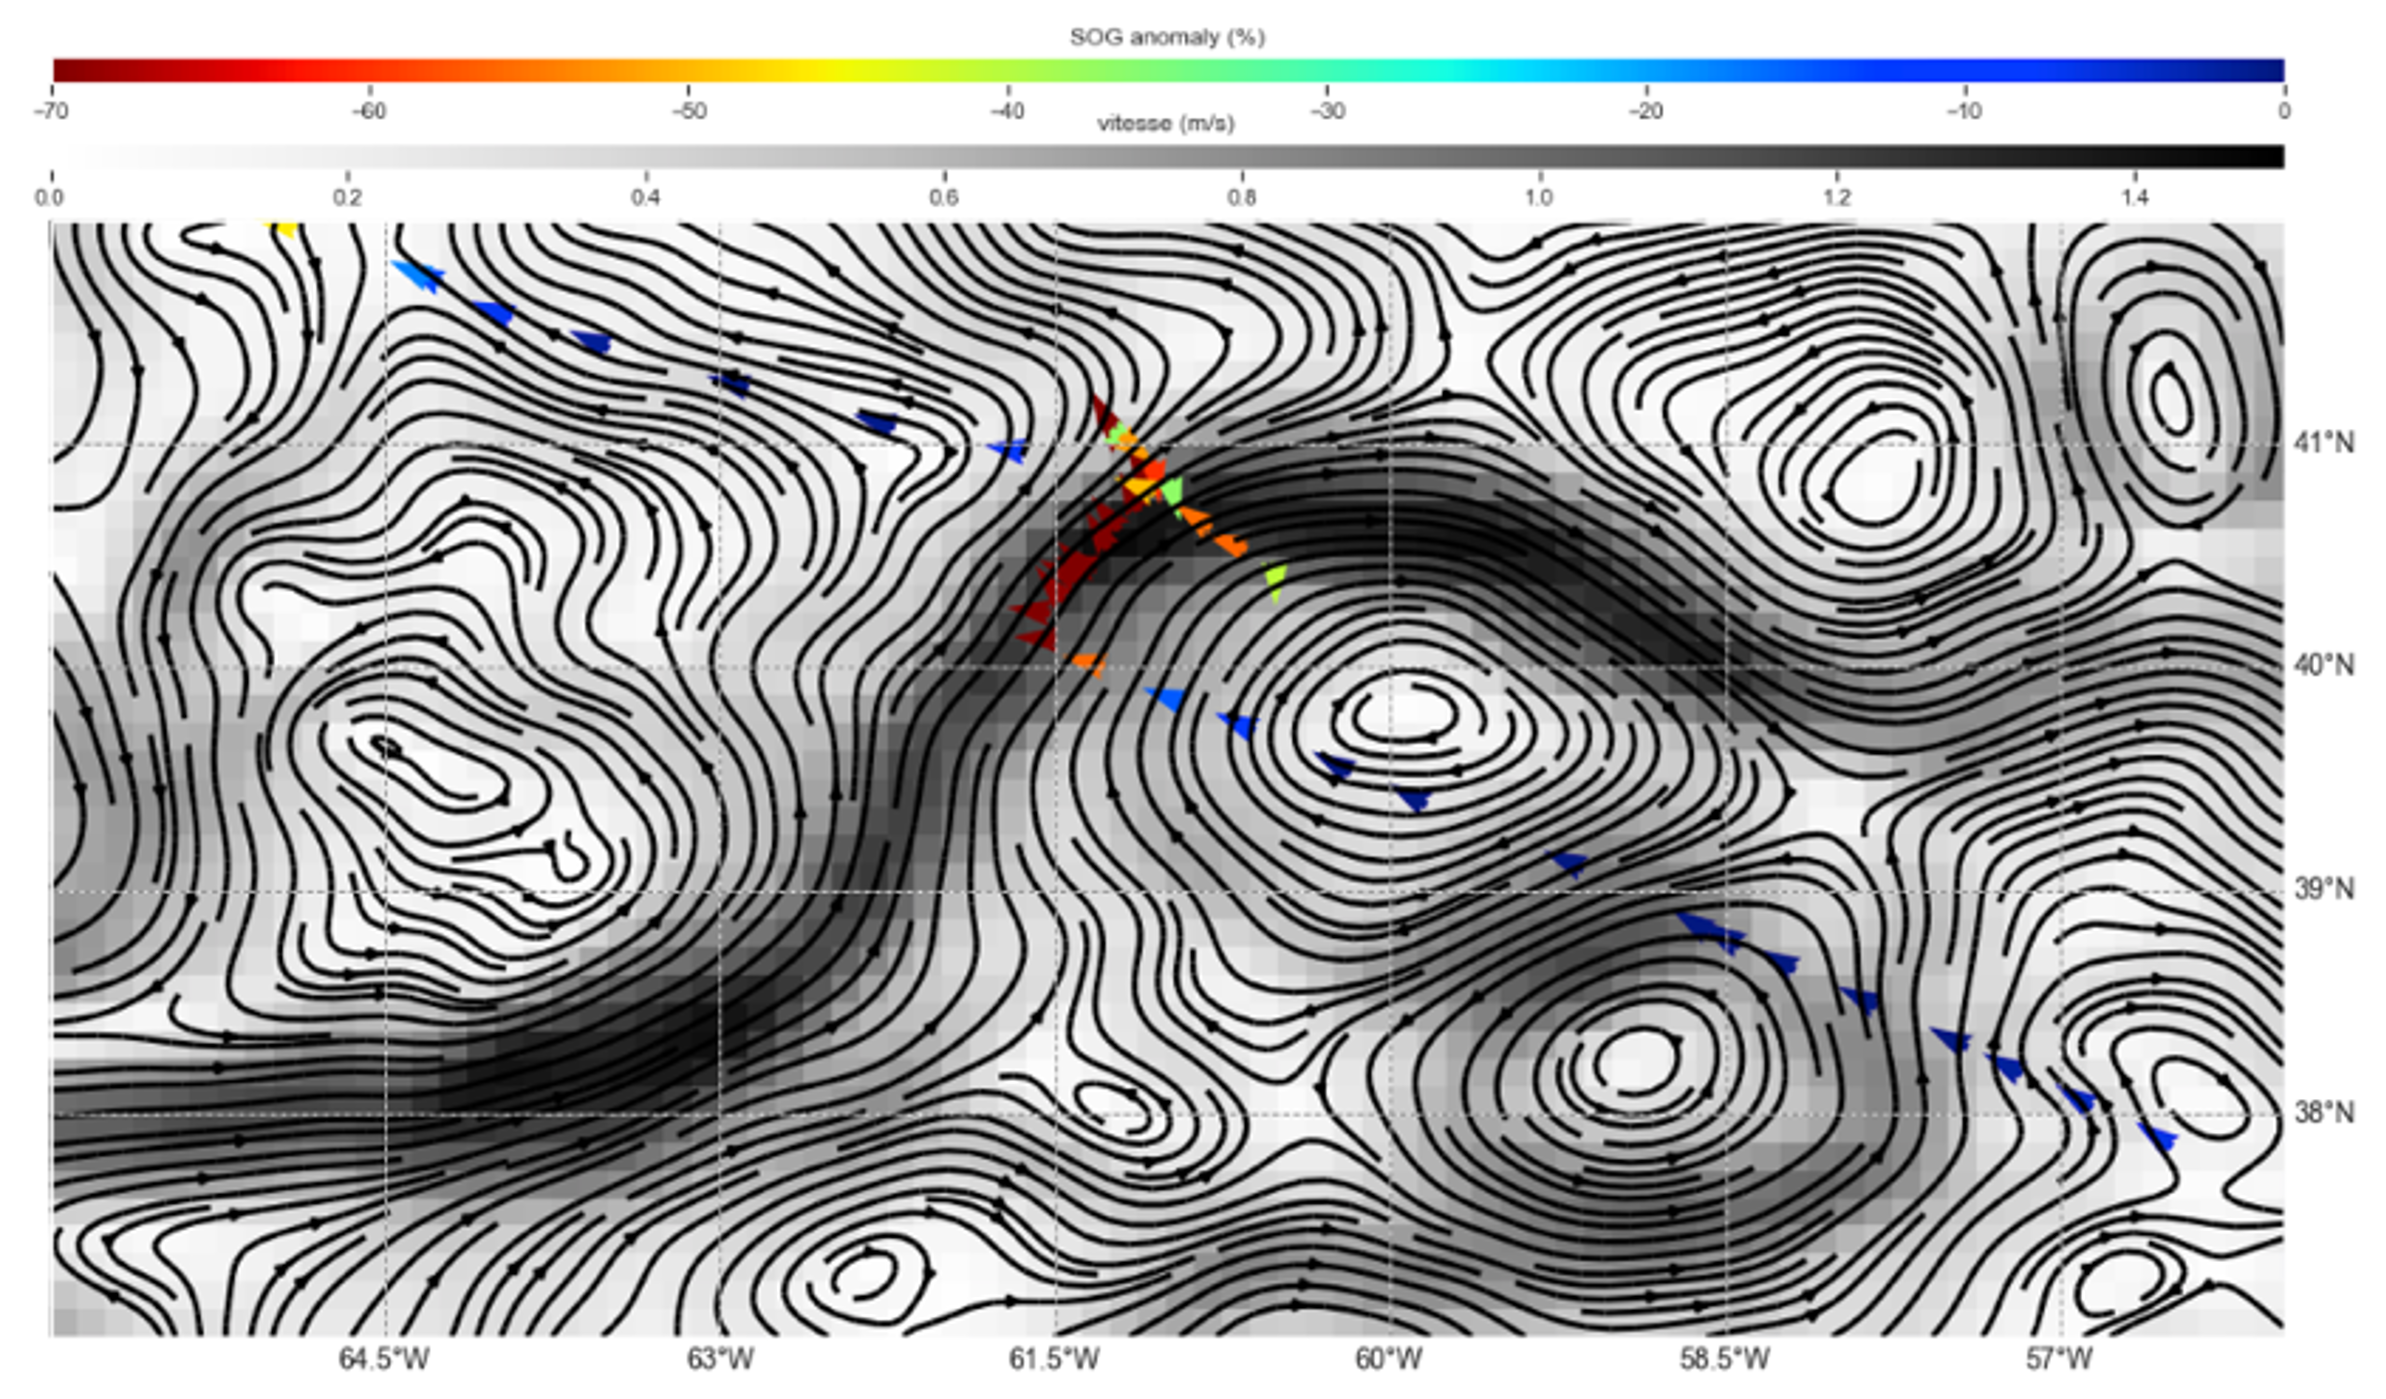 Insightful Gulf Stream current and atypical ship trajectories analysis